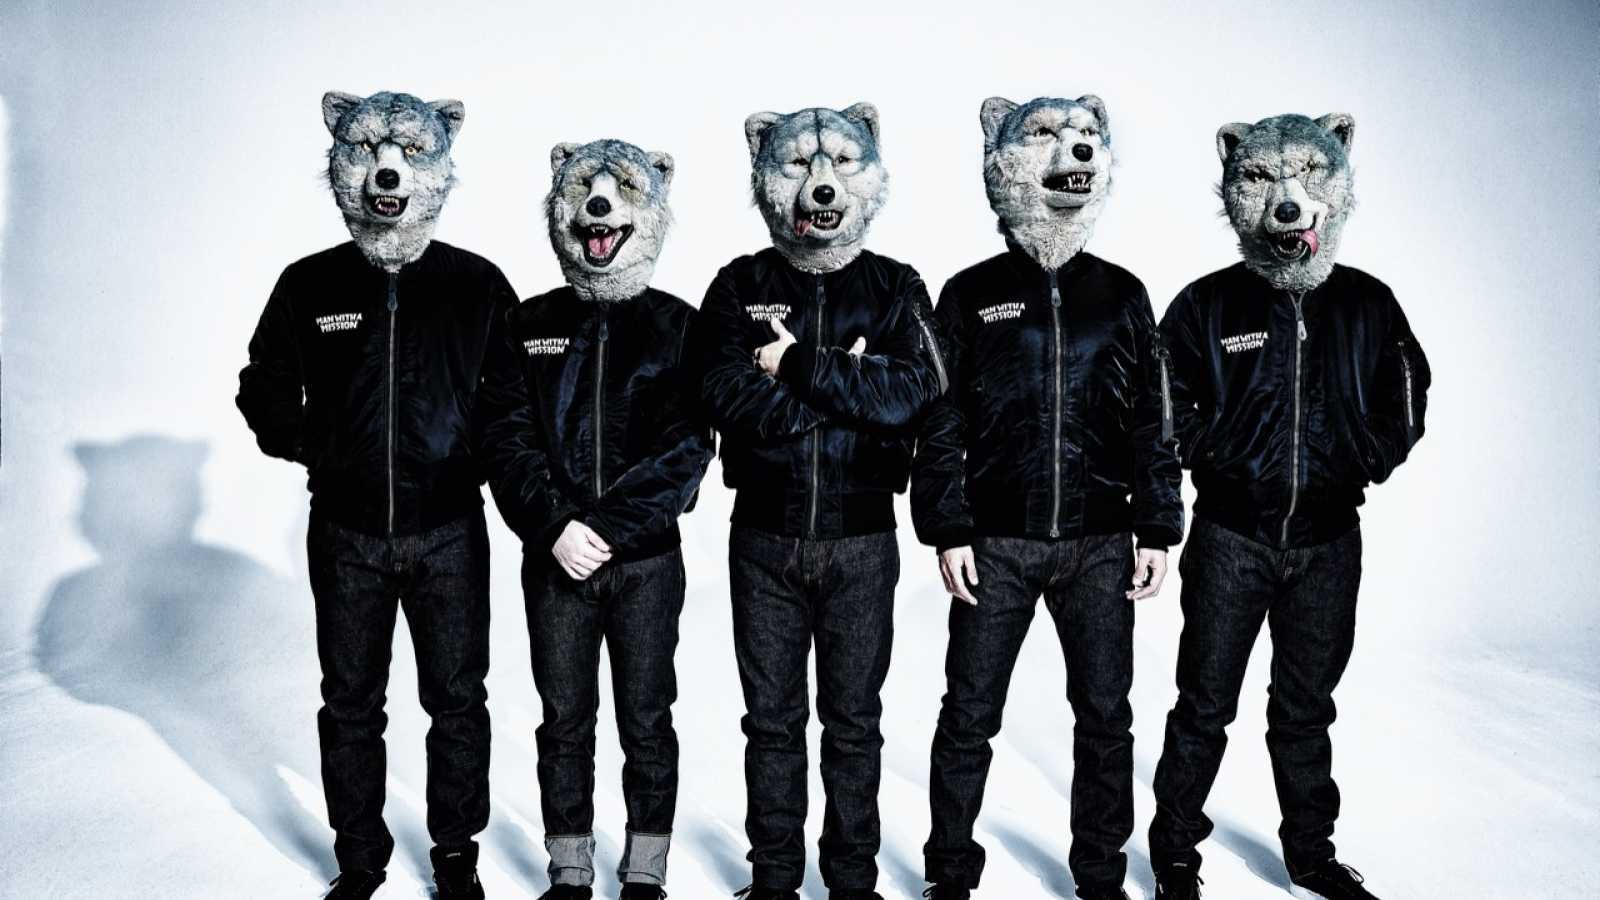 Стрим шоу MAN WITH A MISSION и новый сингл © MAN WITH A MISSION. All rights reserved.